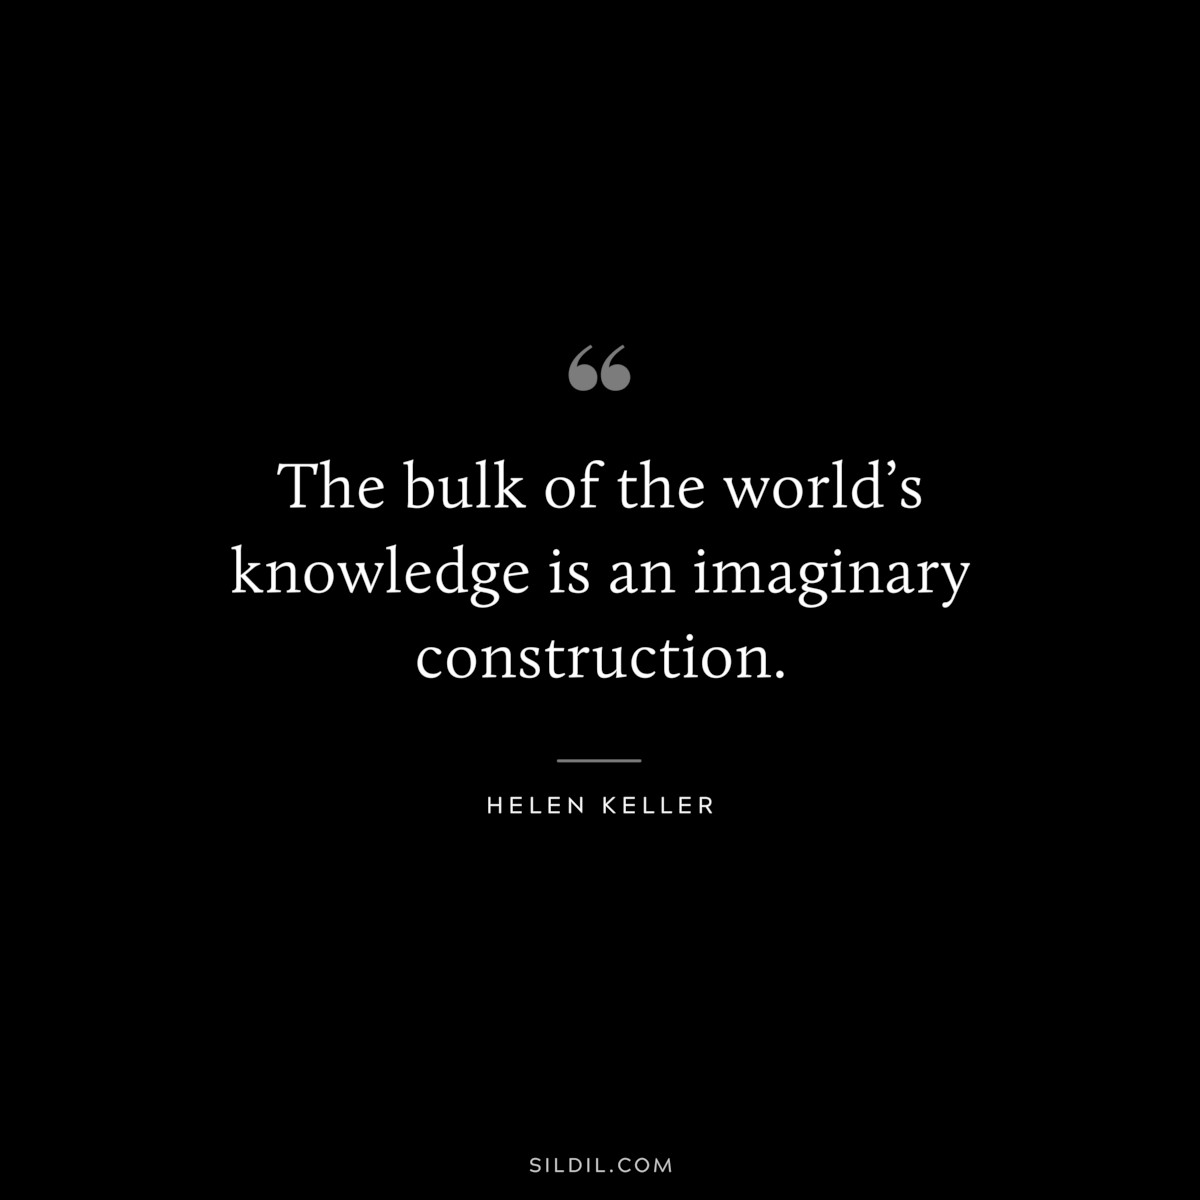 The bulk of the world’s knowledge is an imaginary construction. ― Helen Keller